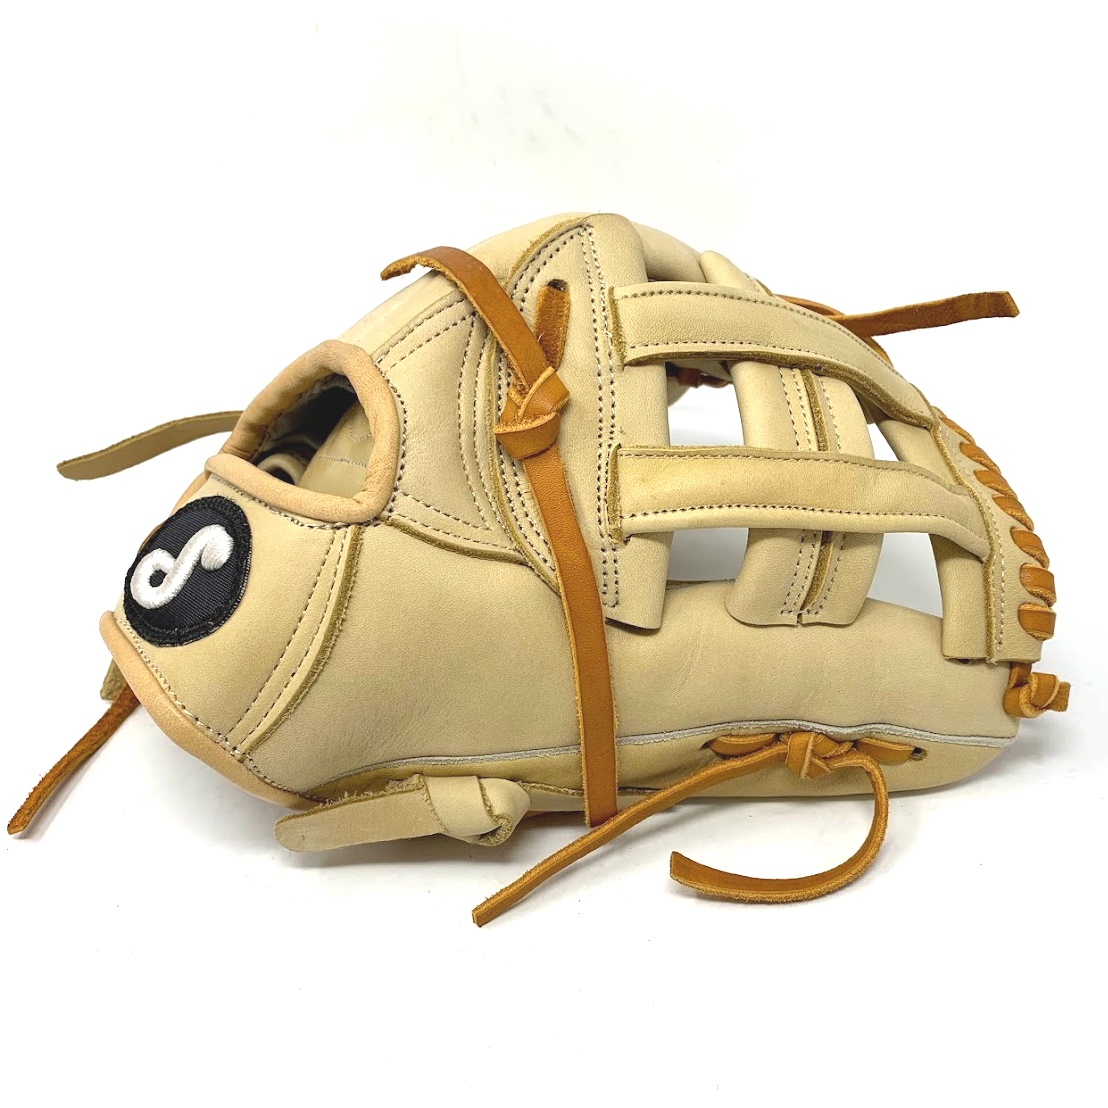 soto-camel-12-inch-h-web-baseball-glove-right-hand-throw S20-12-CM-H-RightHandThrow soto  Made in Mexico    The Soto family has been making gloves